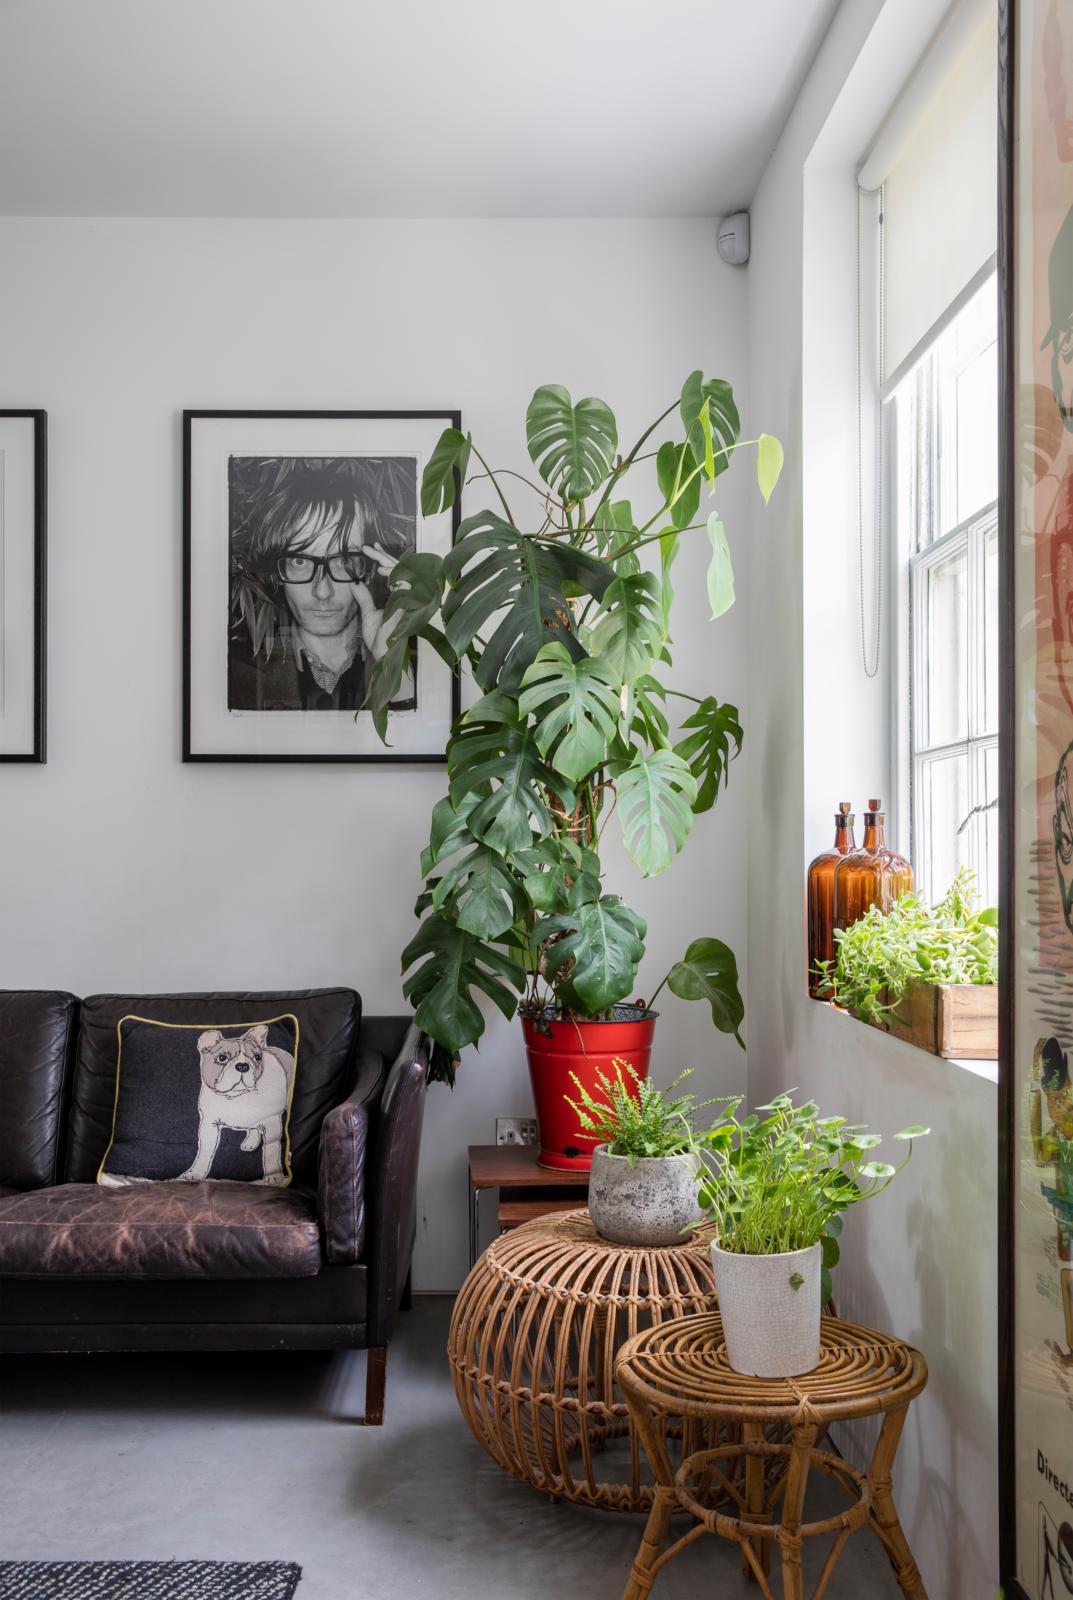 Monstera in a red pot next to a leather sofa